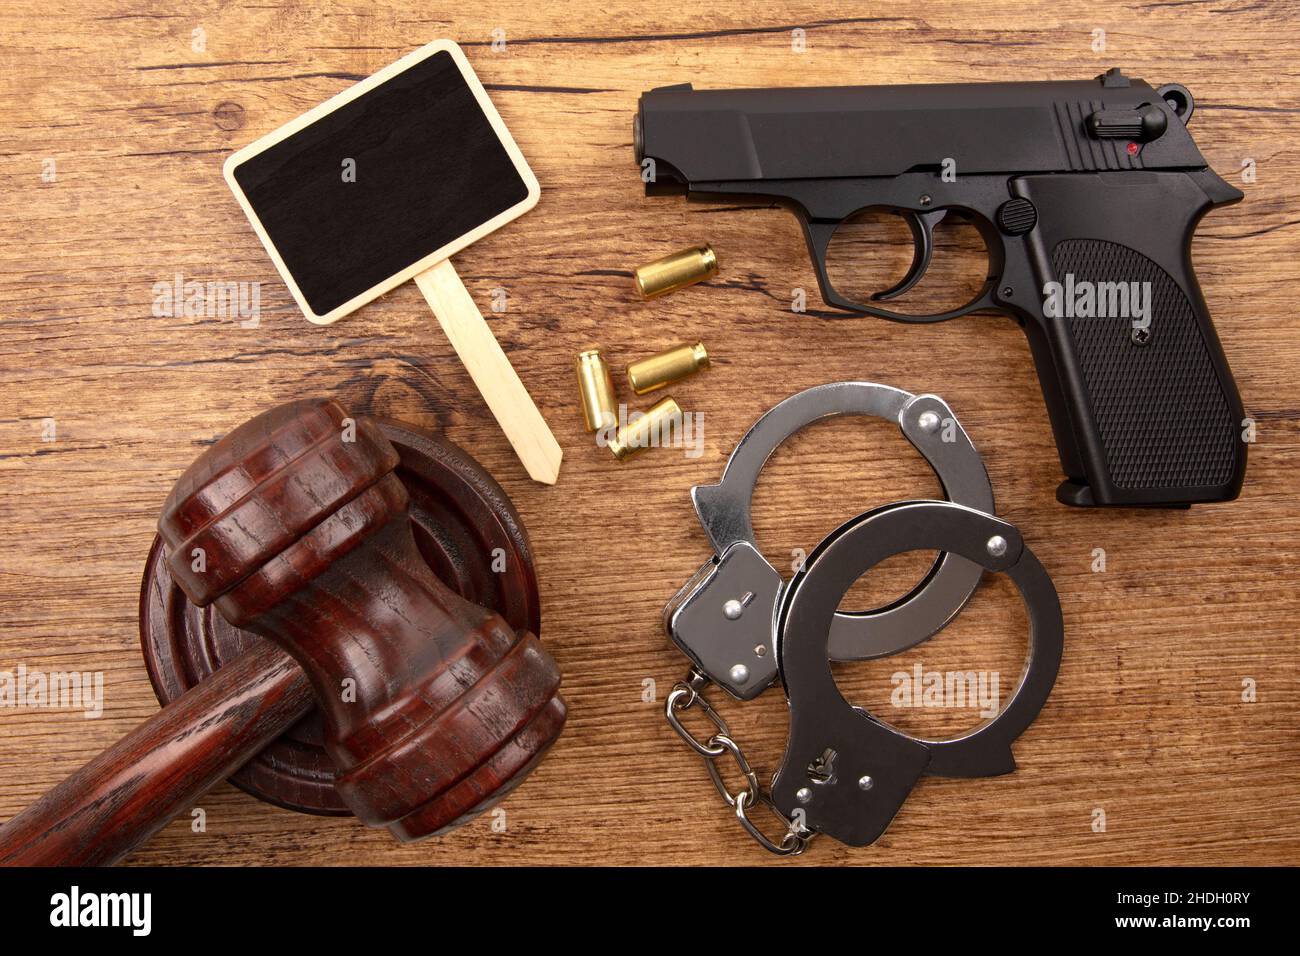 justice, crime, weapons law, justices, crimes Stock Photo